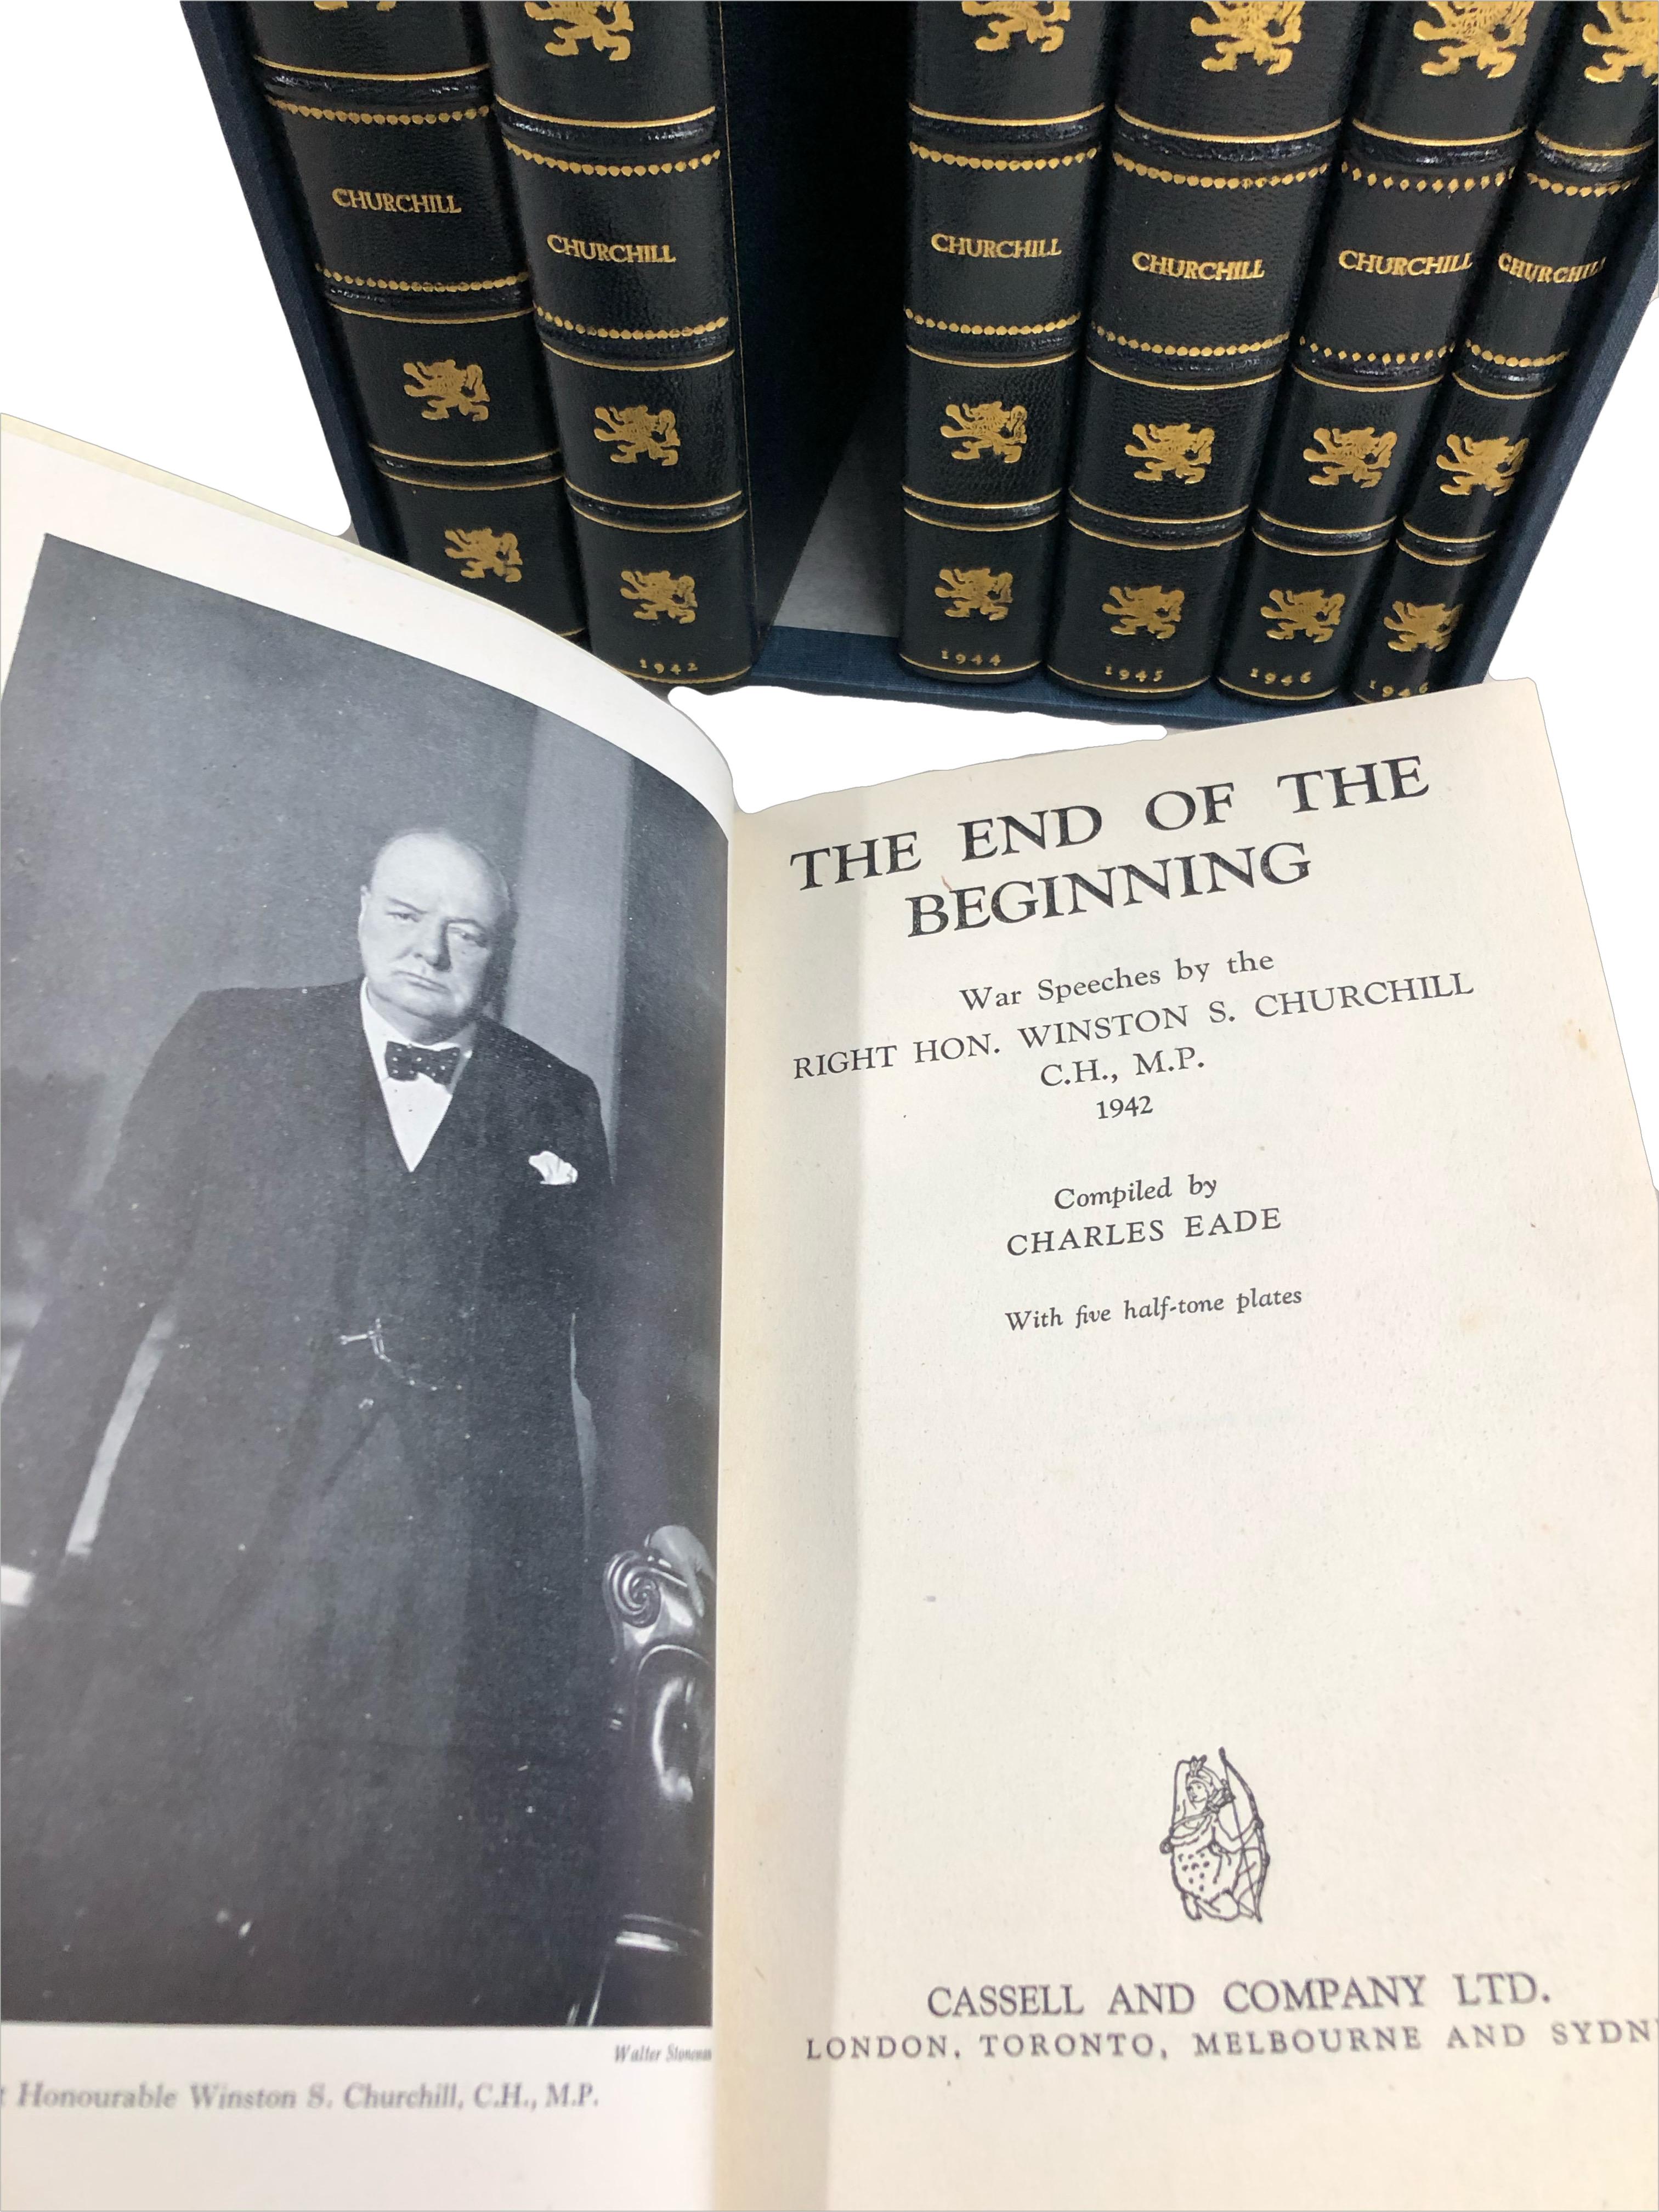 The War Speeches, Secret Session Speeches by W. Churchill, First Ed., Signed 1